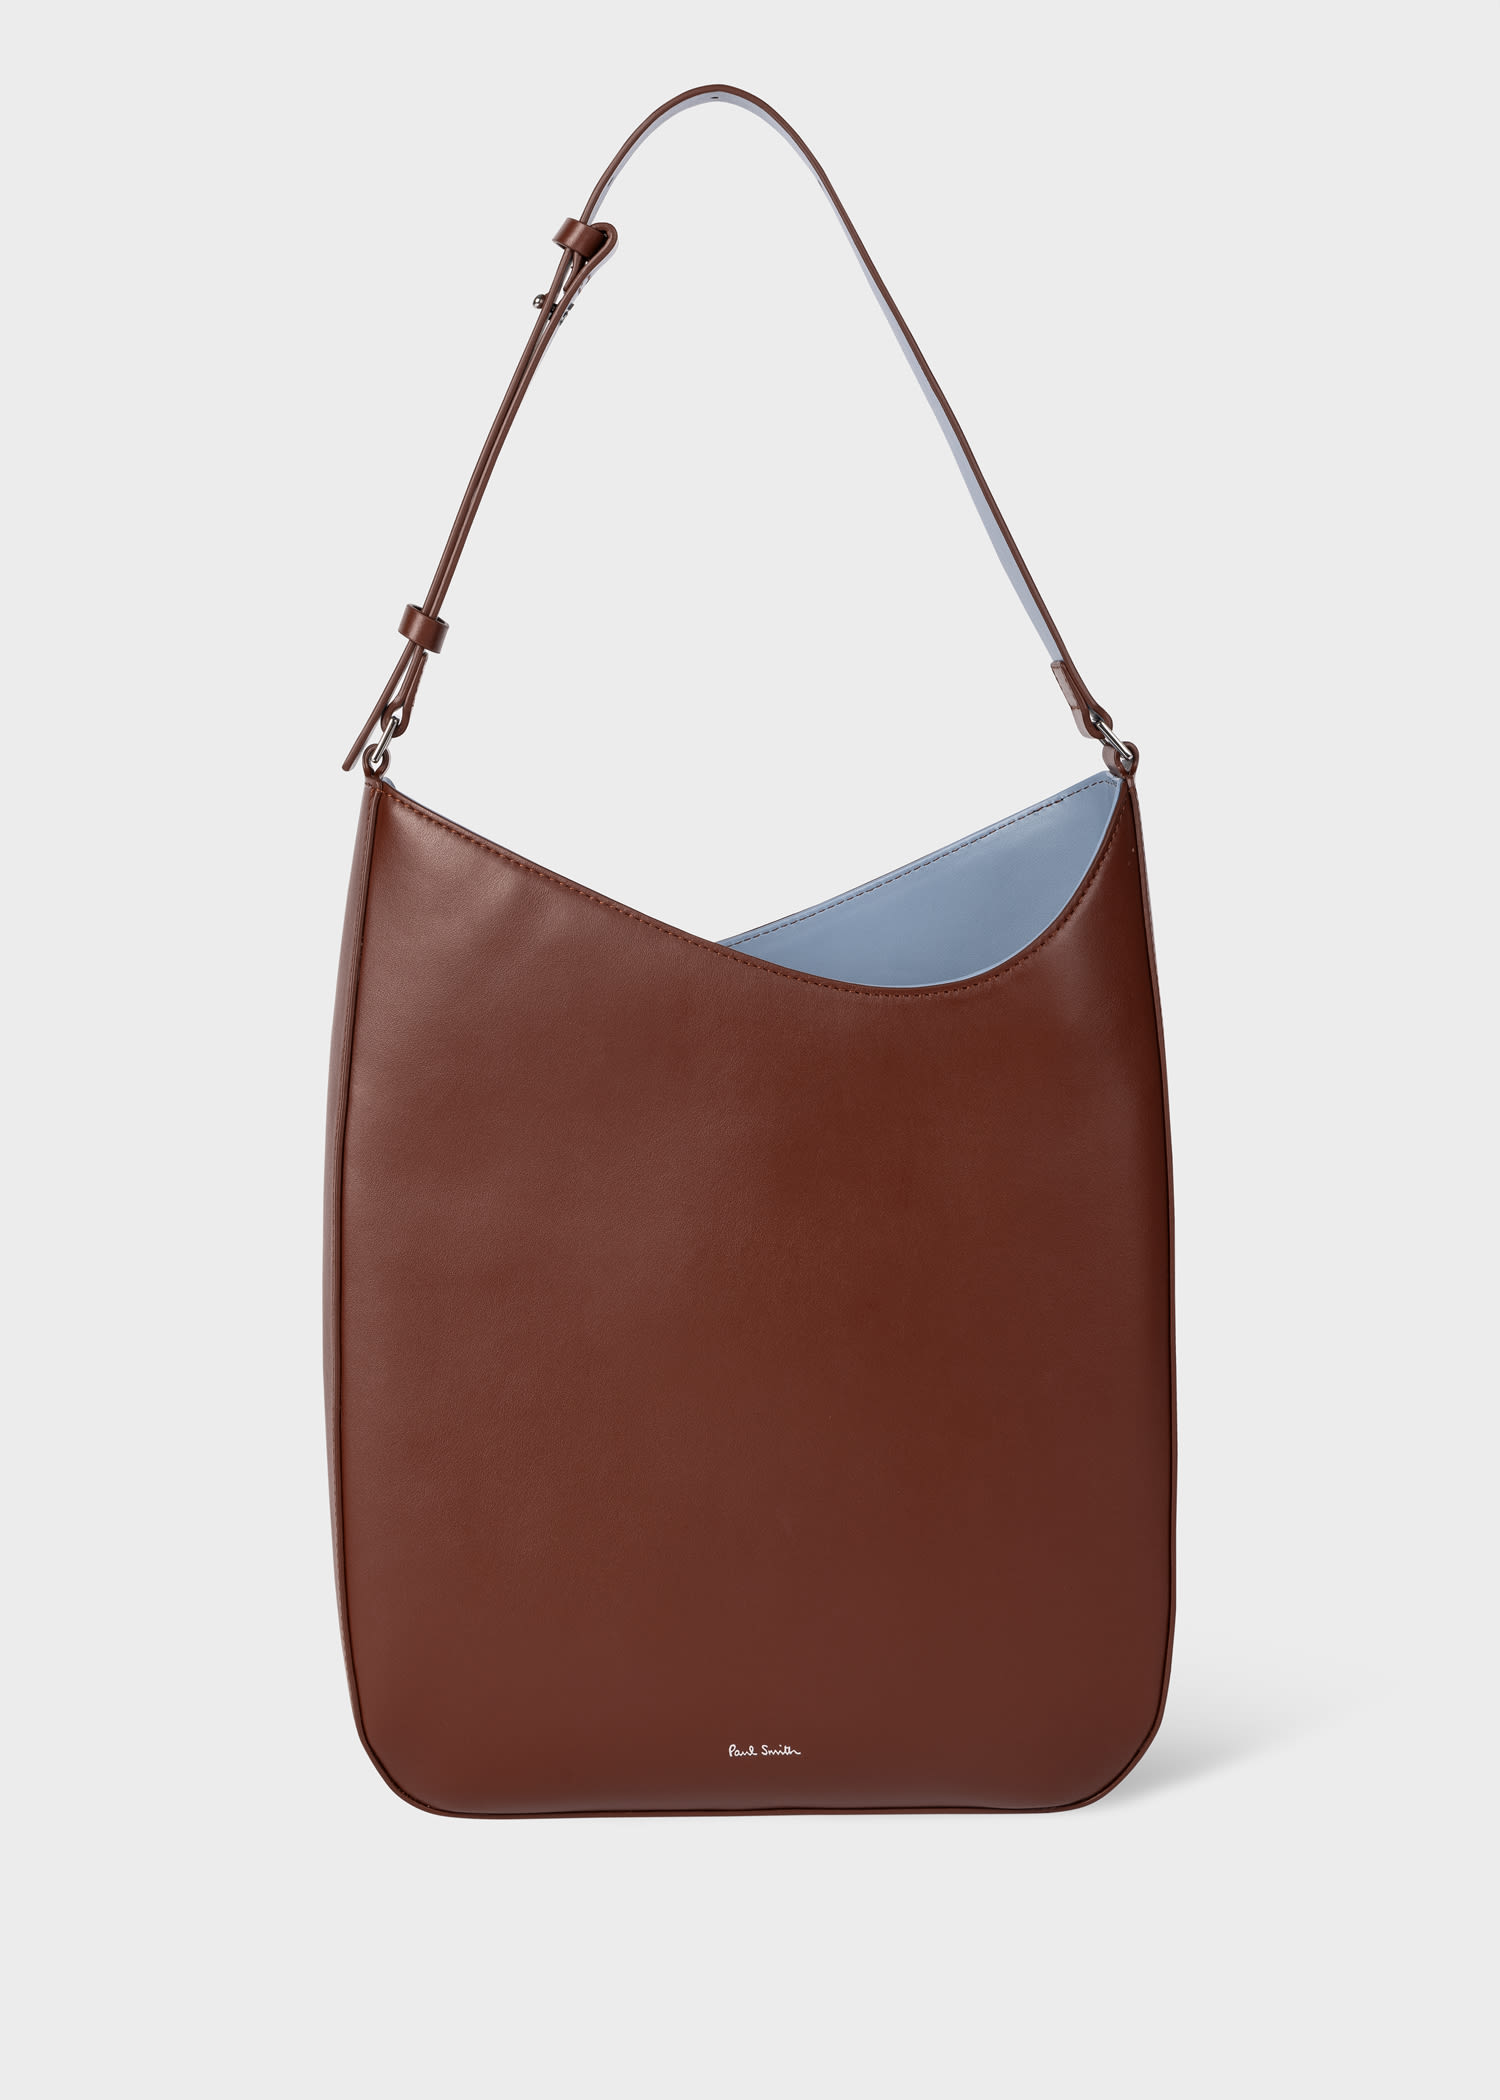 Furla contrast-lining Leather Tote Bag